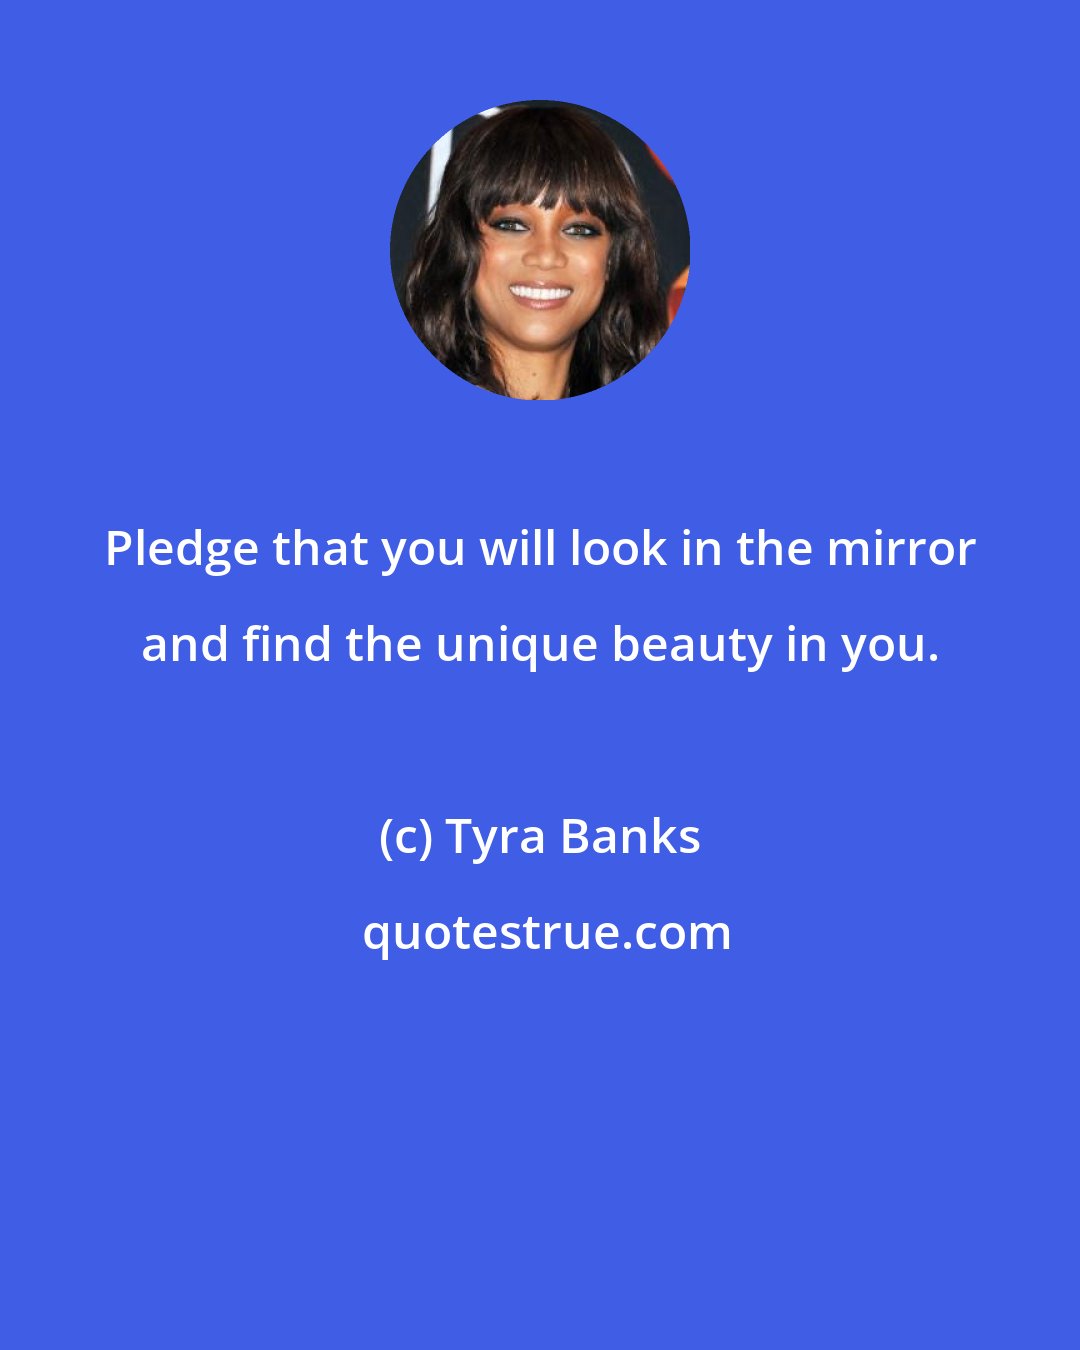 Tyra Banks: Pledge that you will look in the mirror and find the unique beauty in you.